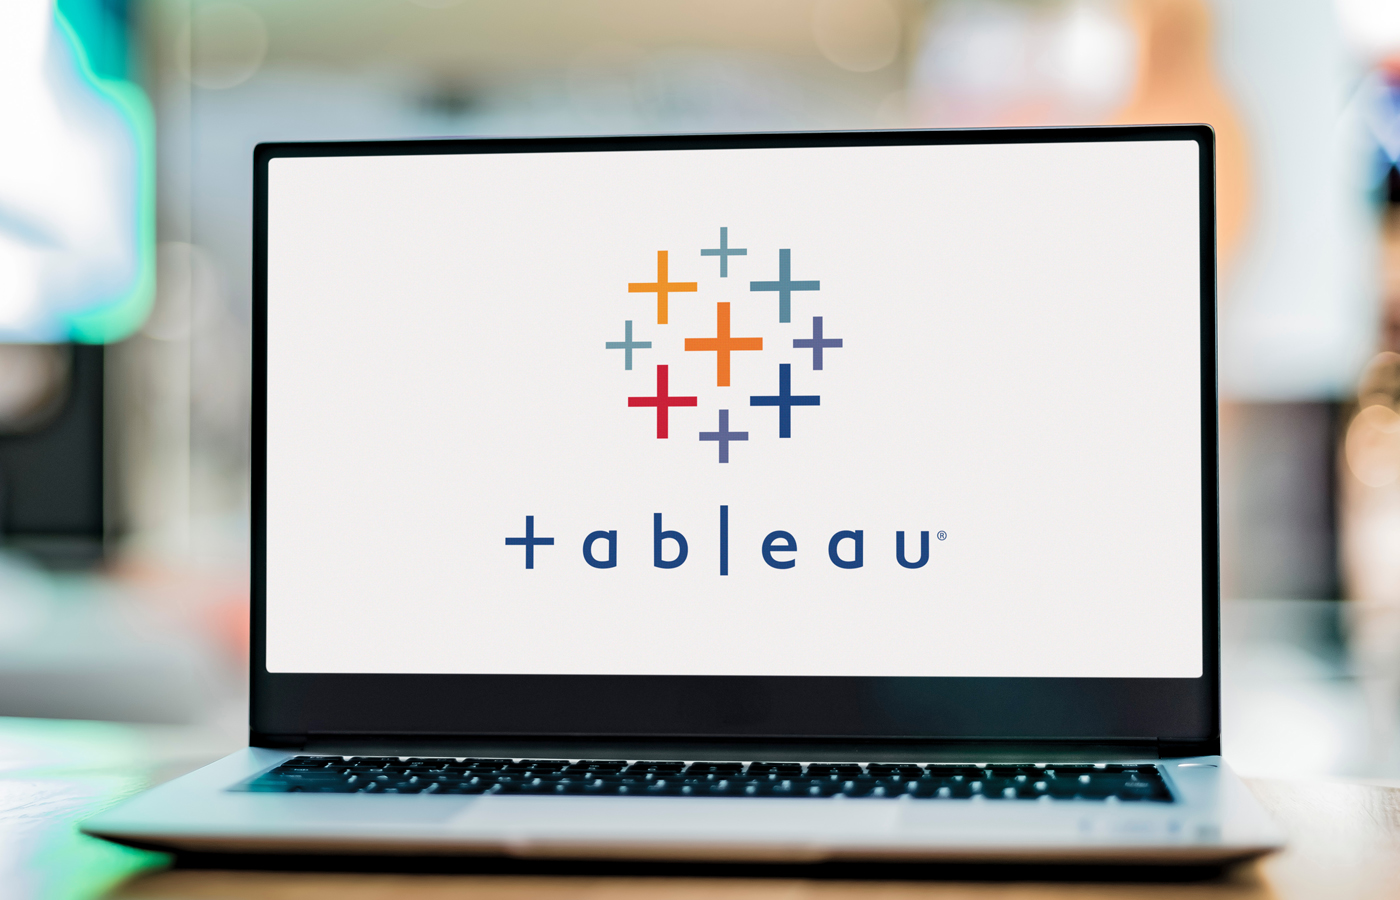 Tableau Cheat Sheet: Complete Guide for Beginners